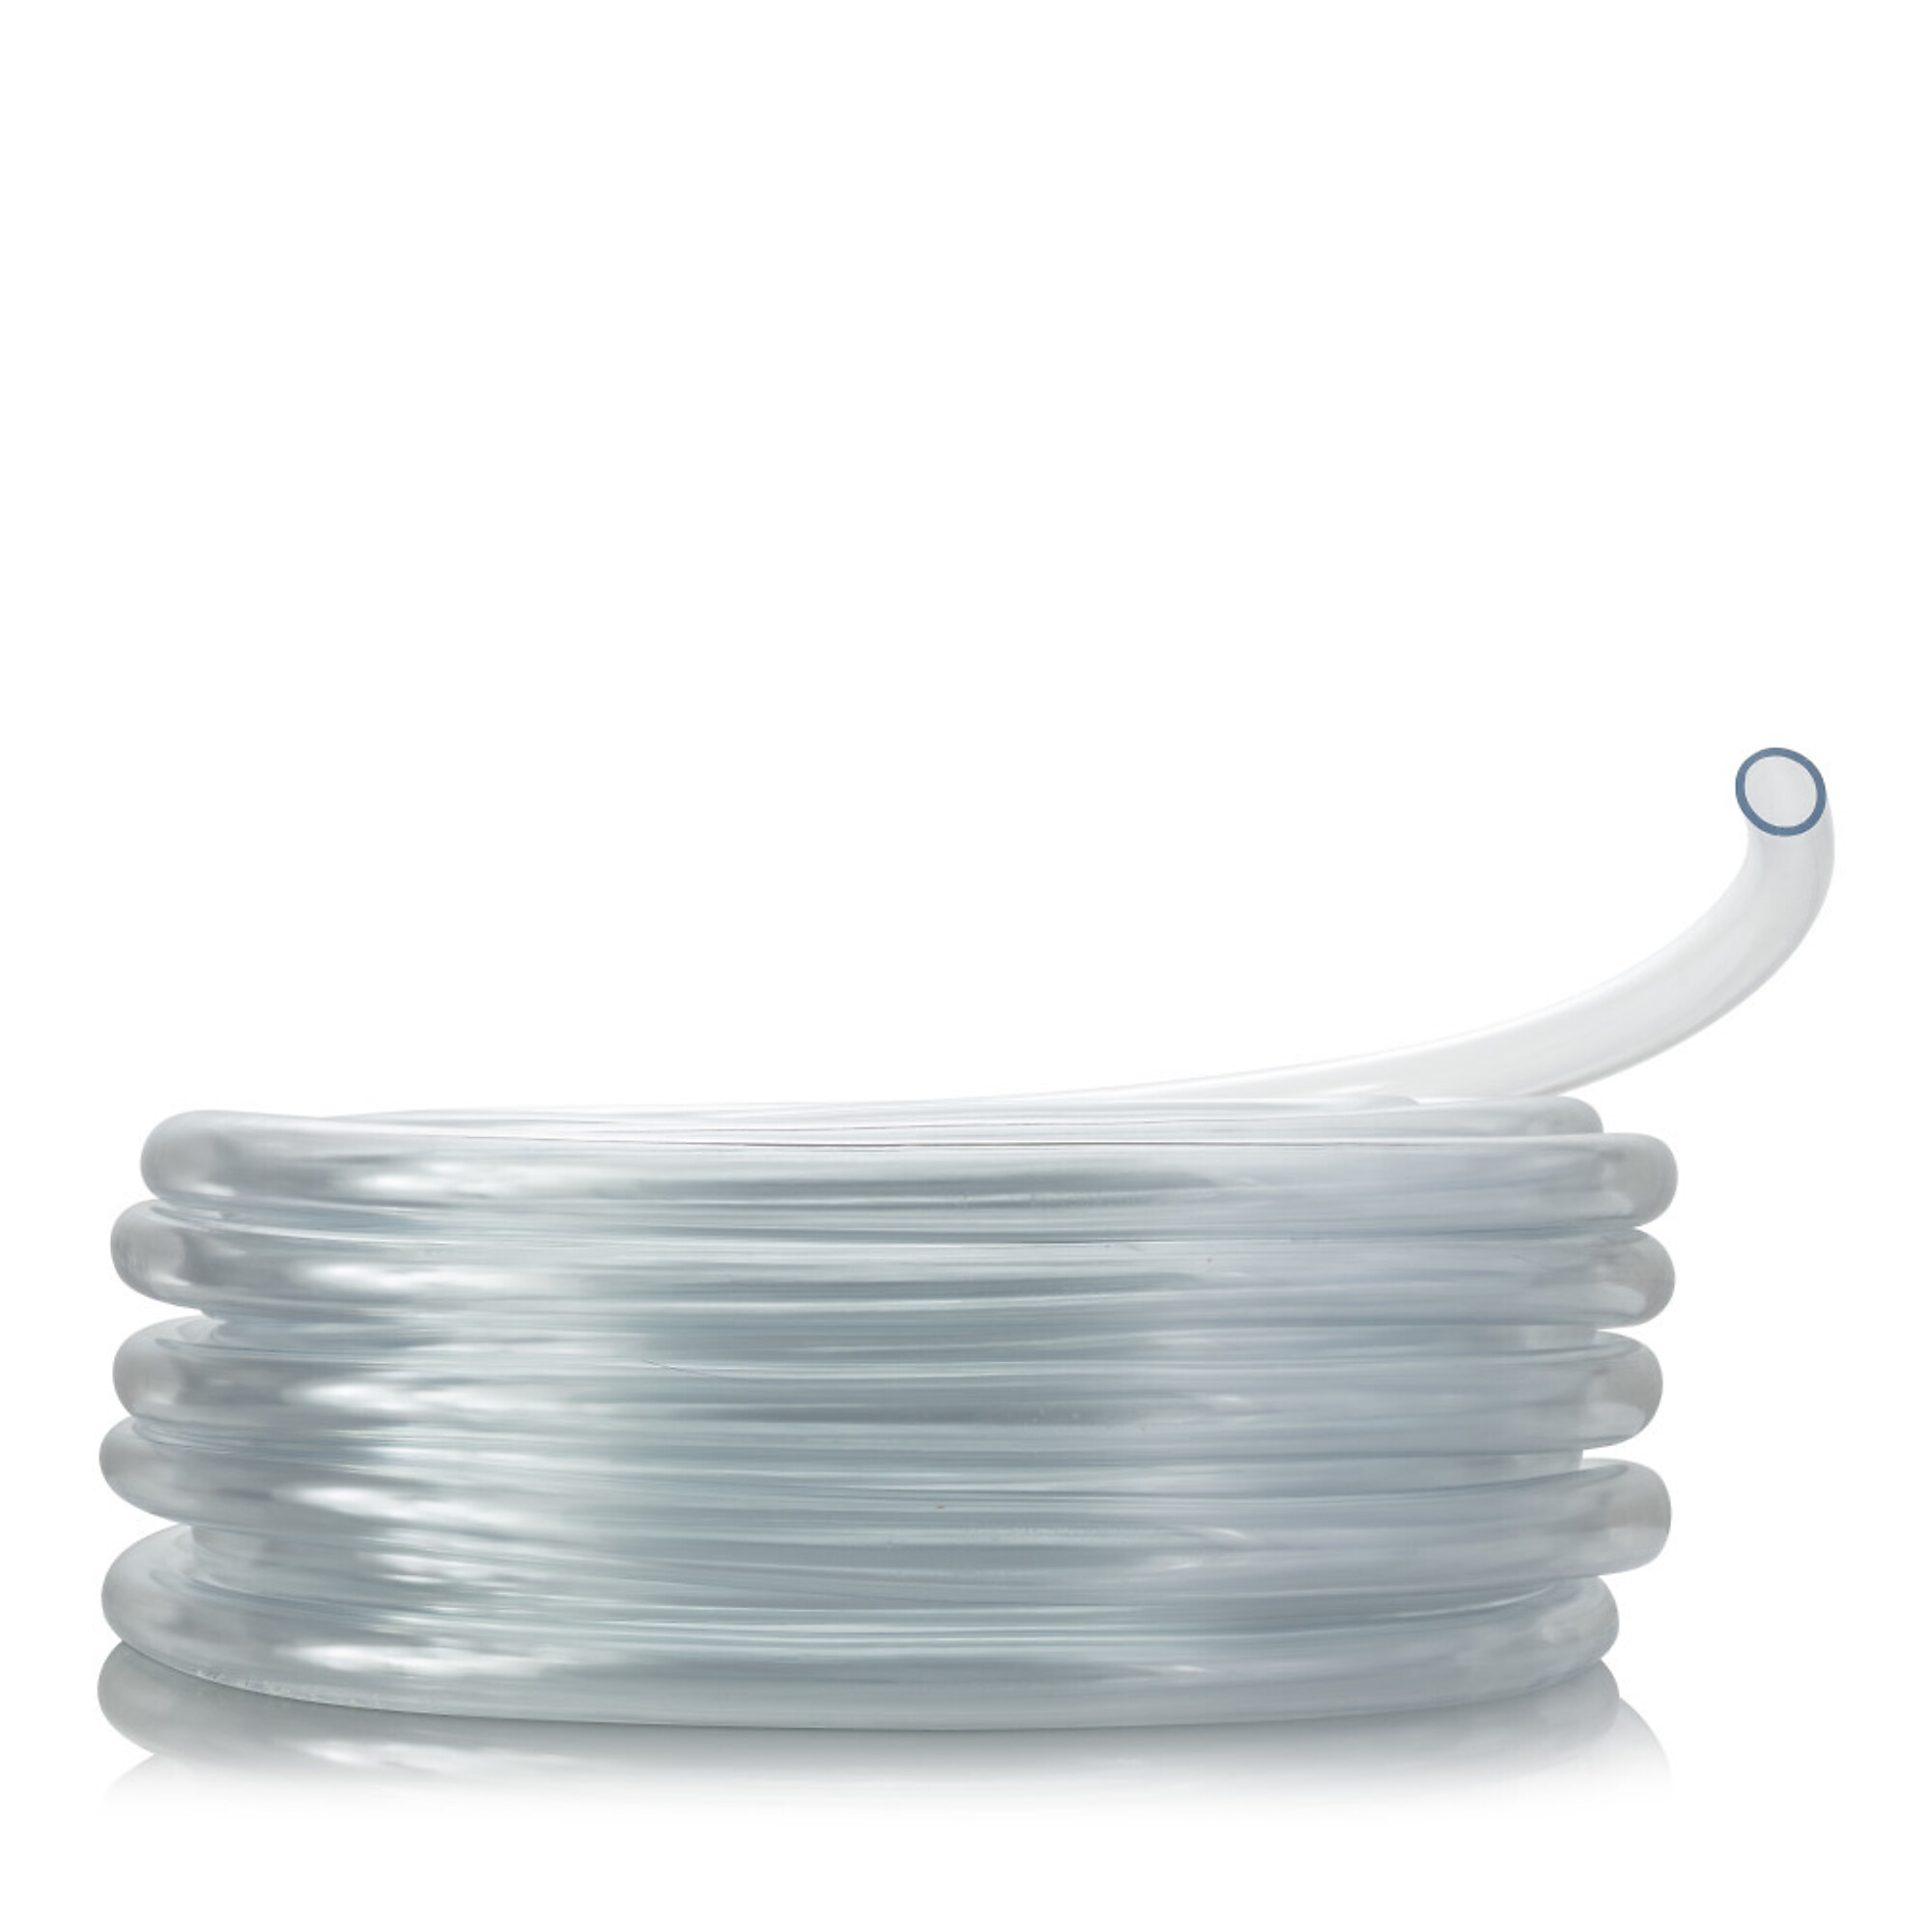 Alpine Corporation, 1/4Inch I.D. x1/16Inch Wall PVC Clear Tubing x 100ft. Coil, Model V0143P